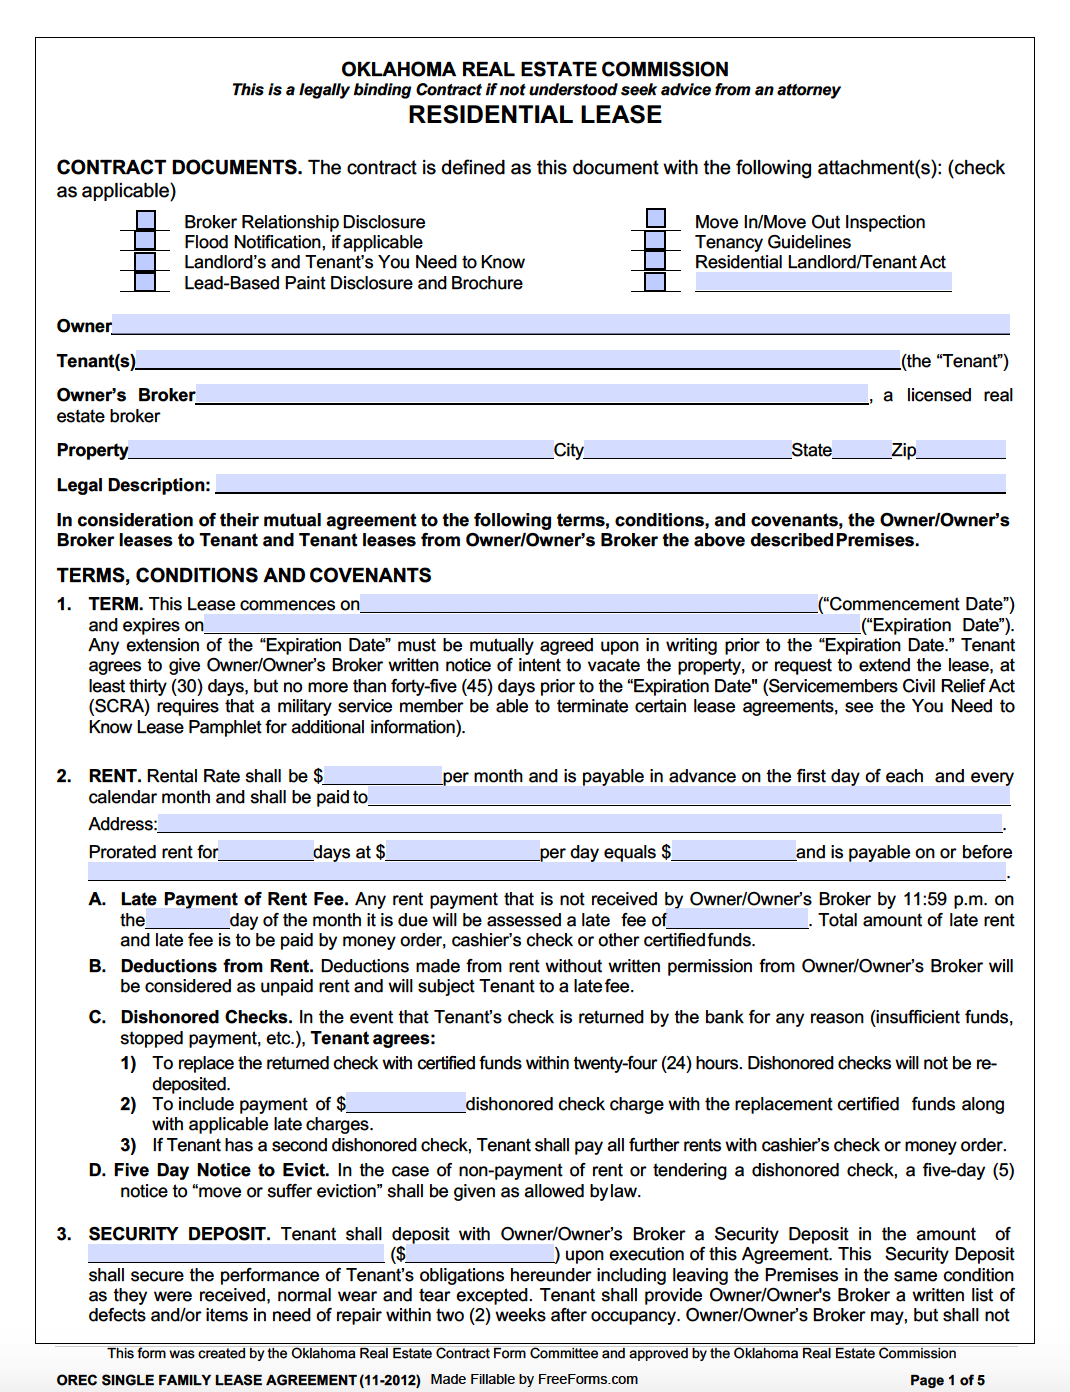 free-oklahoma-standard-residential-lease-agreement-word-pdf-eforms